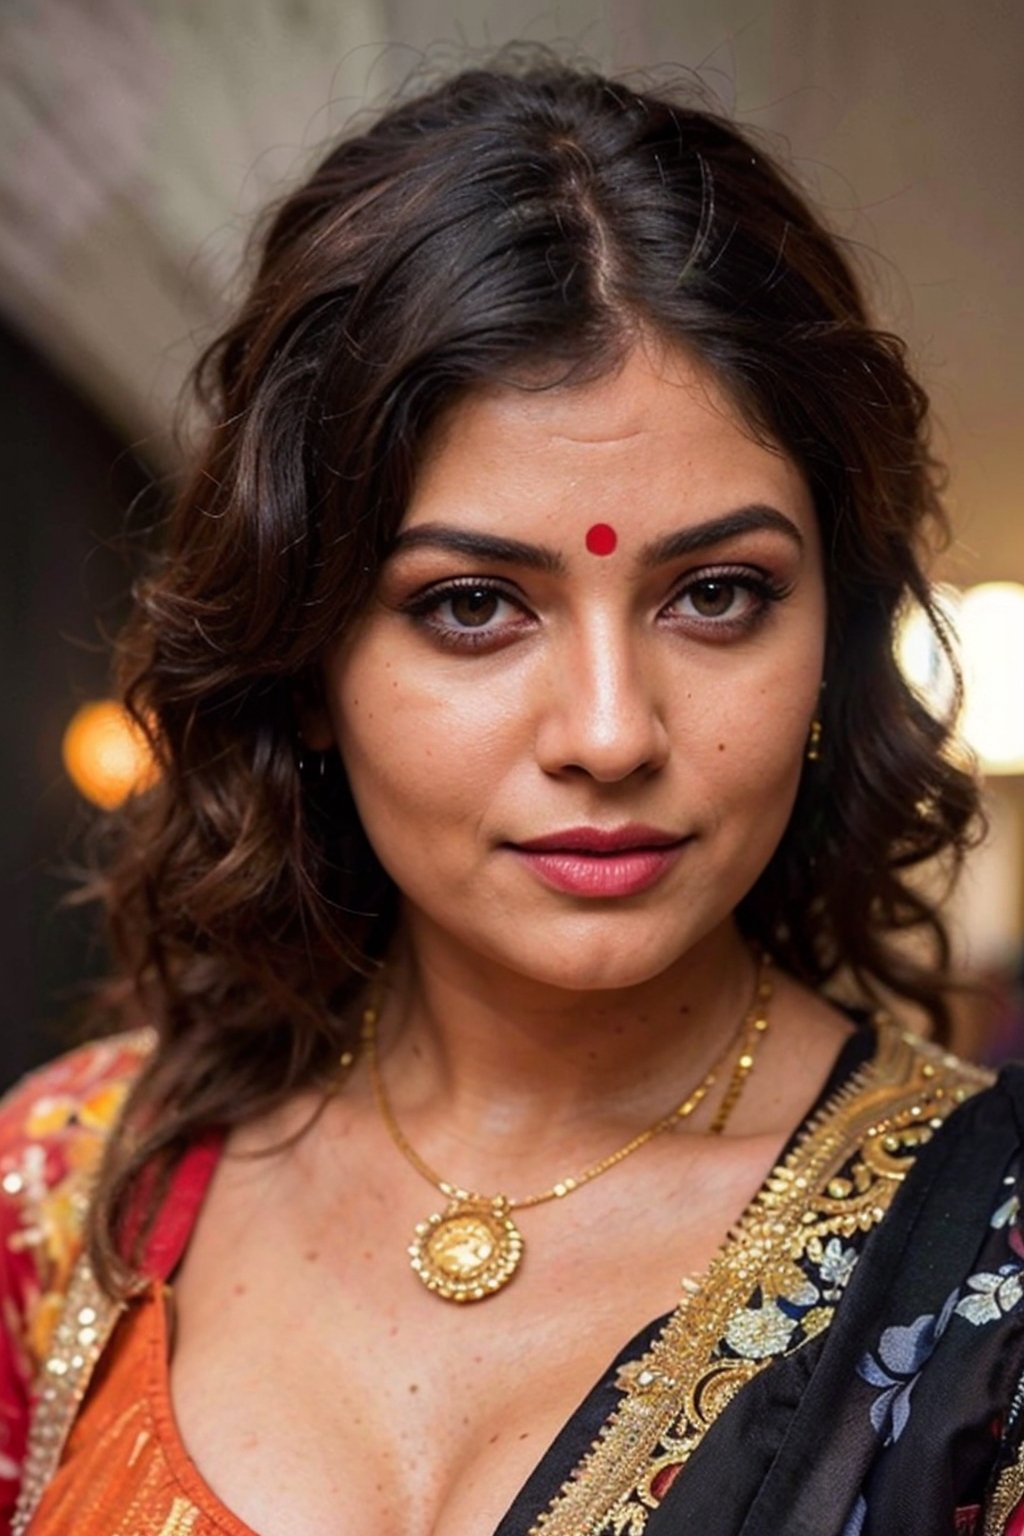 masterpiece, 8k, best quality, ultra highres, professional photography, sharp focus, HDR, 8K resolution, intricate detail, sophisticated detail, depth of field, photorealistic, sindoor on hair partings, ((voluptuous,slighty_chubby)), hindu milf, sexy woman with hina tattos,  lariat necklace, large breasts, blushing, kohl eyed, ((large breast, curvaceous)), at dashashwamedh ghat of Varanasi, temples of Varanasi, benares, hyperrealistic, (analog quality:1.3), (film grain:1.2), beautiful background, (best quality:1.3), ultra clarity , super realism , 8k, (natural skin texture, hyperrealism, soft light, sharp:1.2), (intricate details:1.12), hdr, (dark shot:1.33), neutral colors, (hdr:1.4), (muted colors:1.5), technicolor, (intricate), (night:1.4), hyperdetailed, dramatic, intricate details, (cinematic),super realism , 8k, (natural skin texture, hyperrealism, soft light, sharp:1.2), (intricate details:1.12), hdr, (dark shot:1.22), vibrant colors, (hdr:1.4), (vibrant colors:1.4), (intricate), (artstation:1.2), hyperdetailed, dramatic, intricate details, (technicolor:0.9), (rutkowski:0.8), cinematic, detailed,